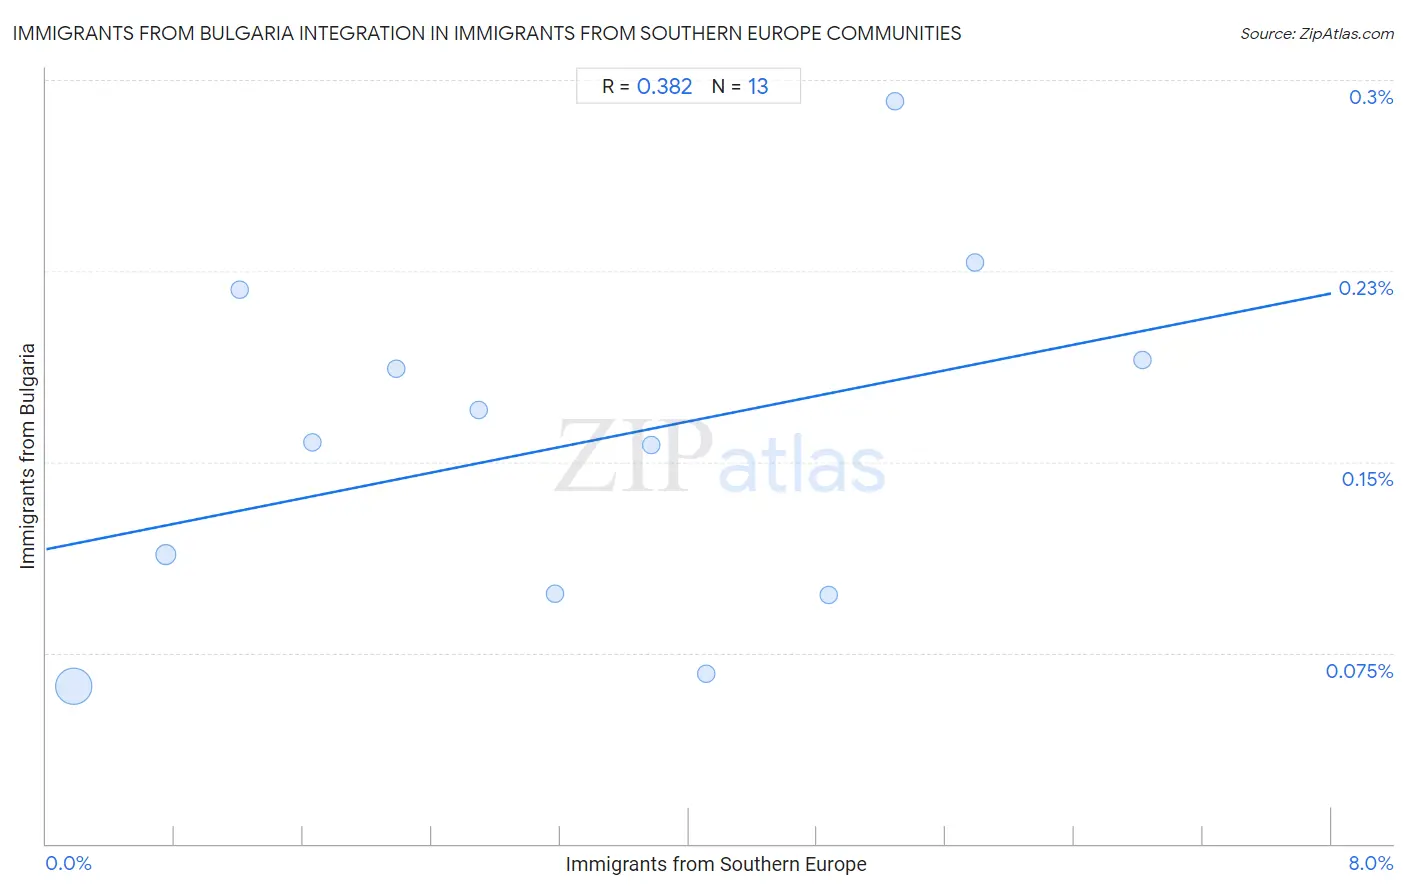 Immigrants from Southern Europe Integration in Immigrants from Bulgaria Communities